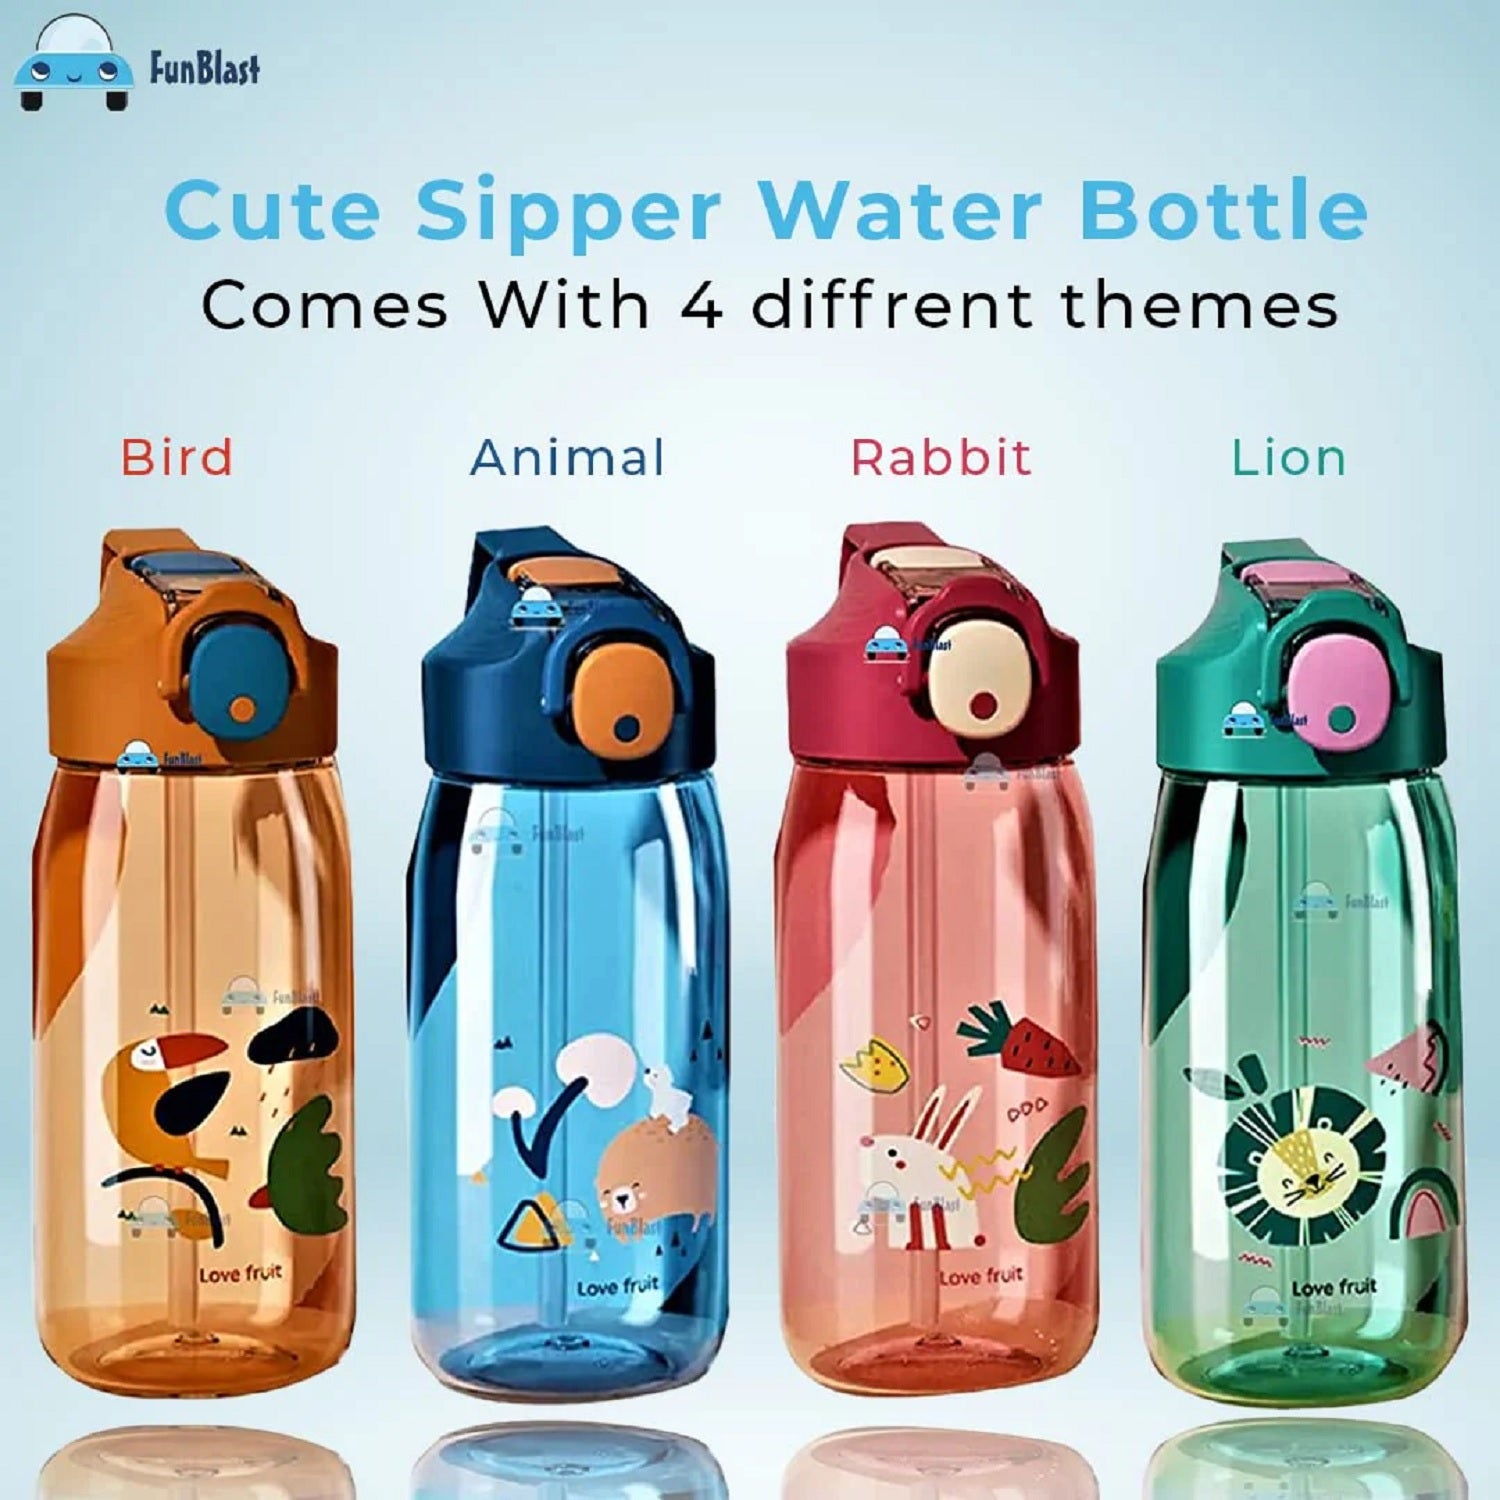 Kids Water Bottle With Straw Toddler Water Bottle Kids Straw Cup Toddler  Water Bottle With Straw Toddler Bottles Kids Water Bottle With Straw Lid  Cute